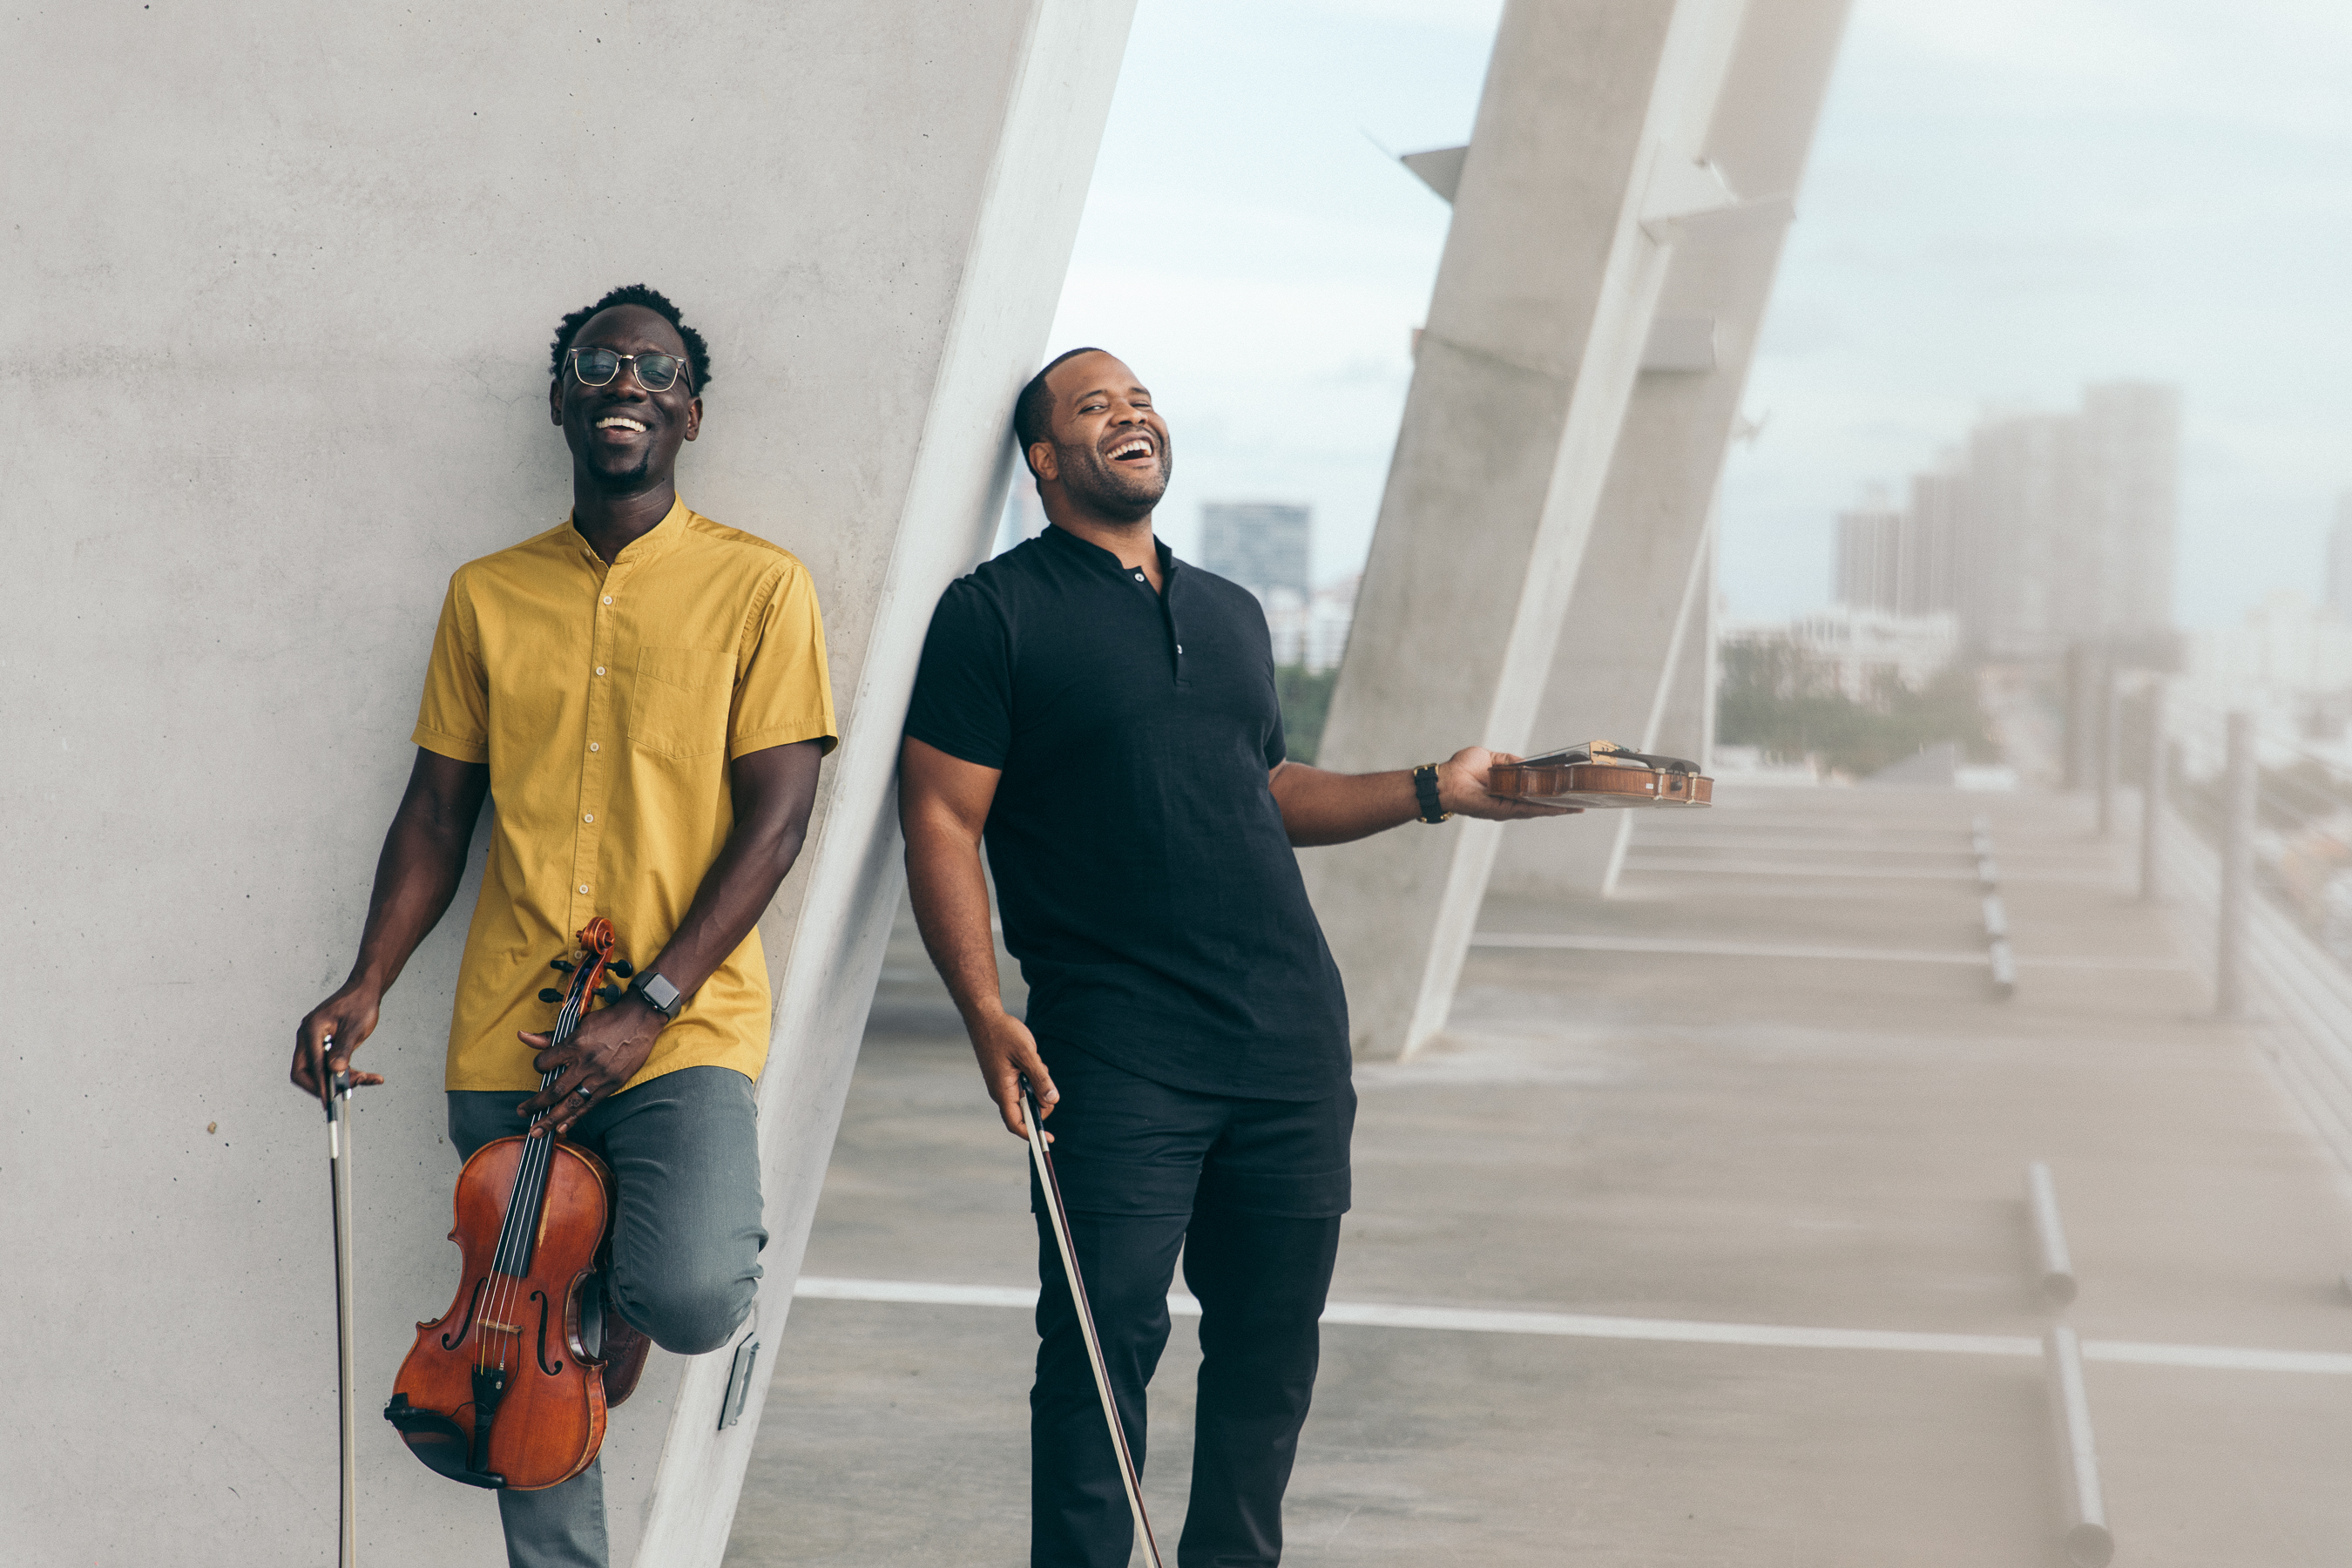 Wil Baptisite and Kev Marcus of Black Violin. Photo credit - Mark Clennon